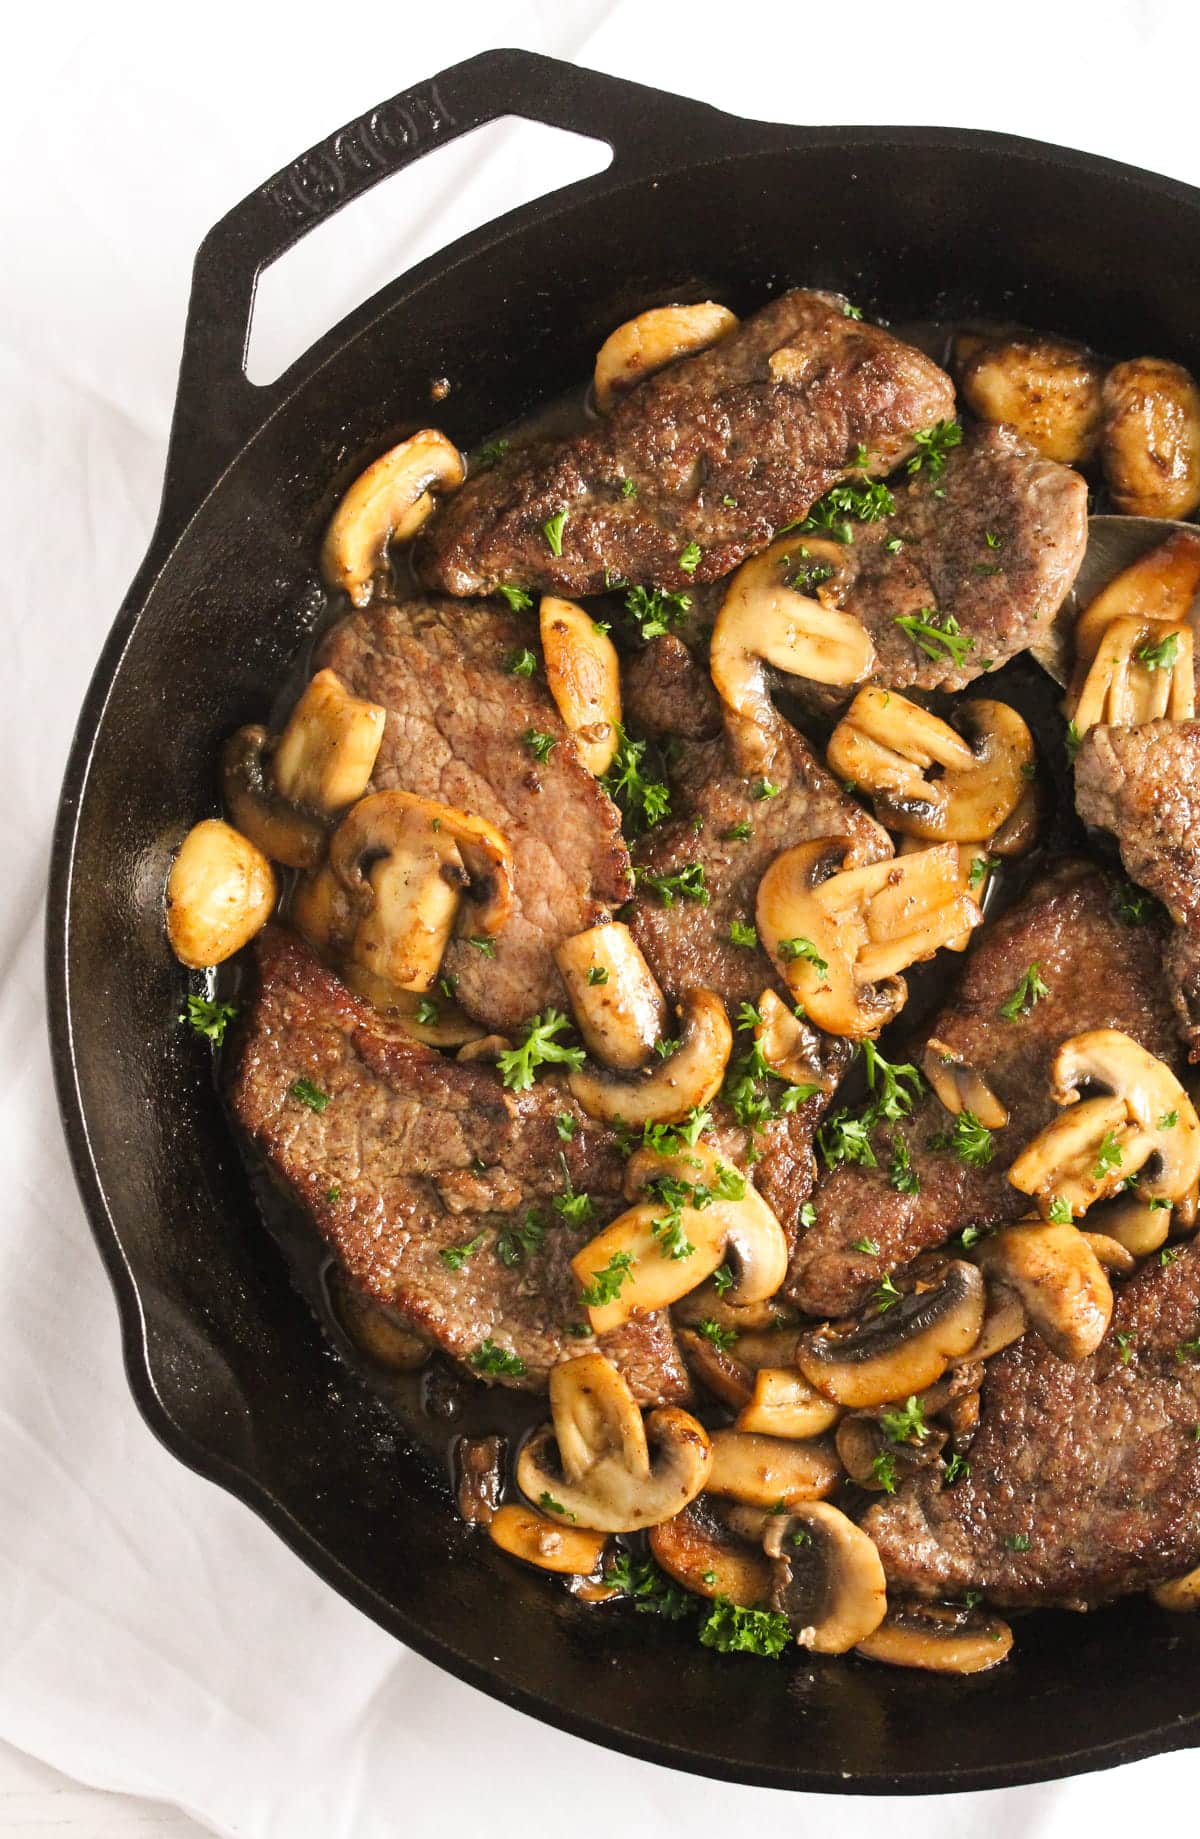 italian veal scallops with marsala sauce and mushrooms in a cast-iron pan.